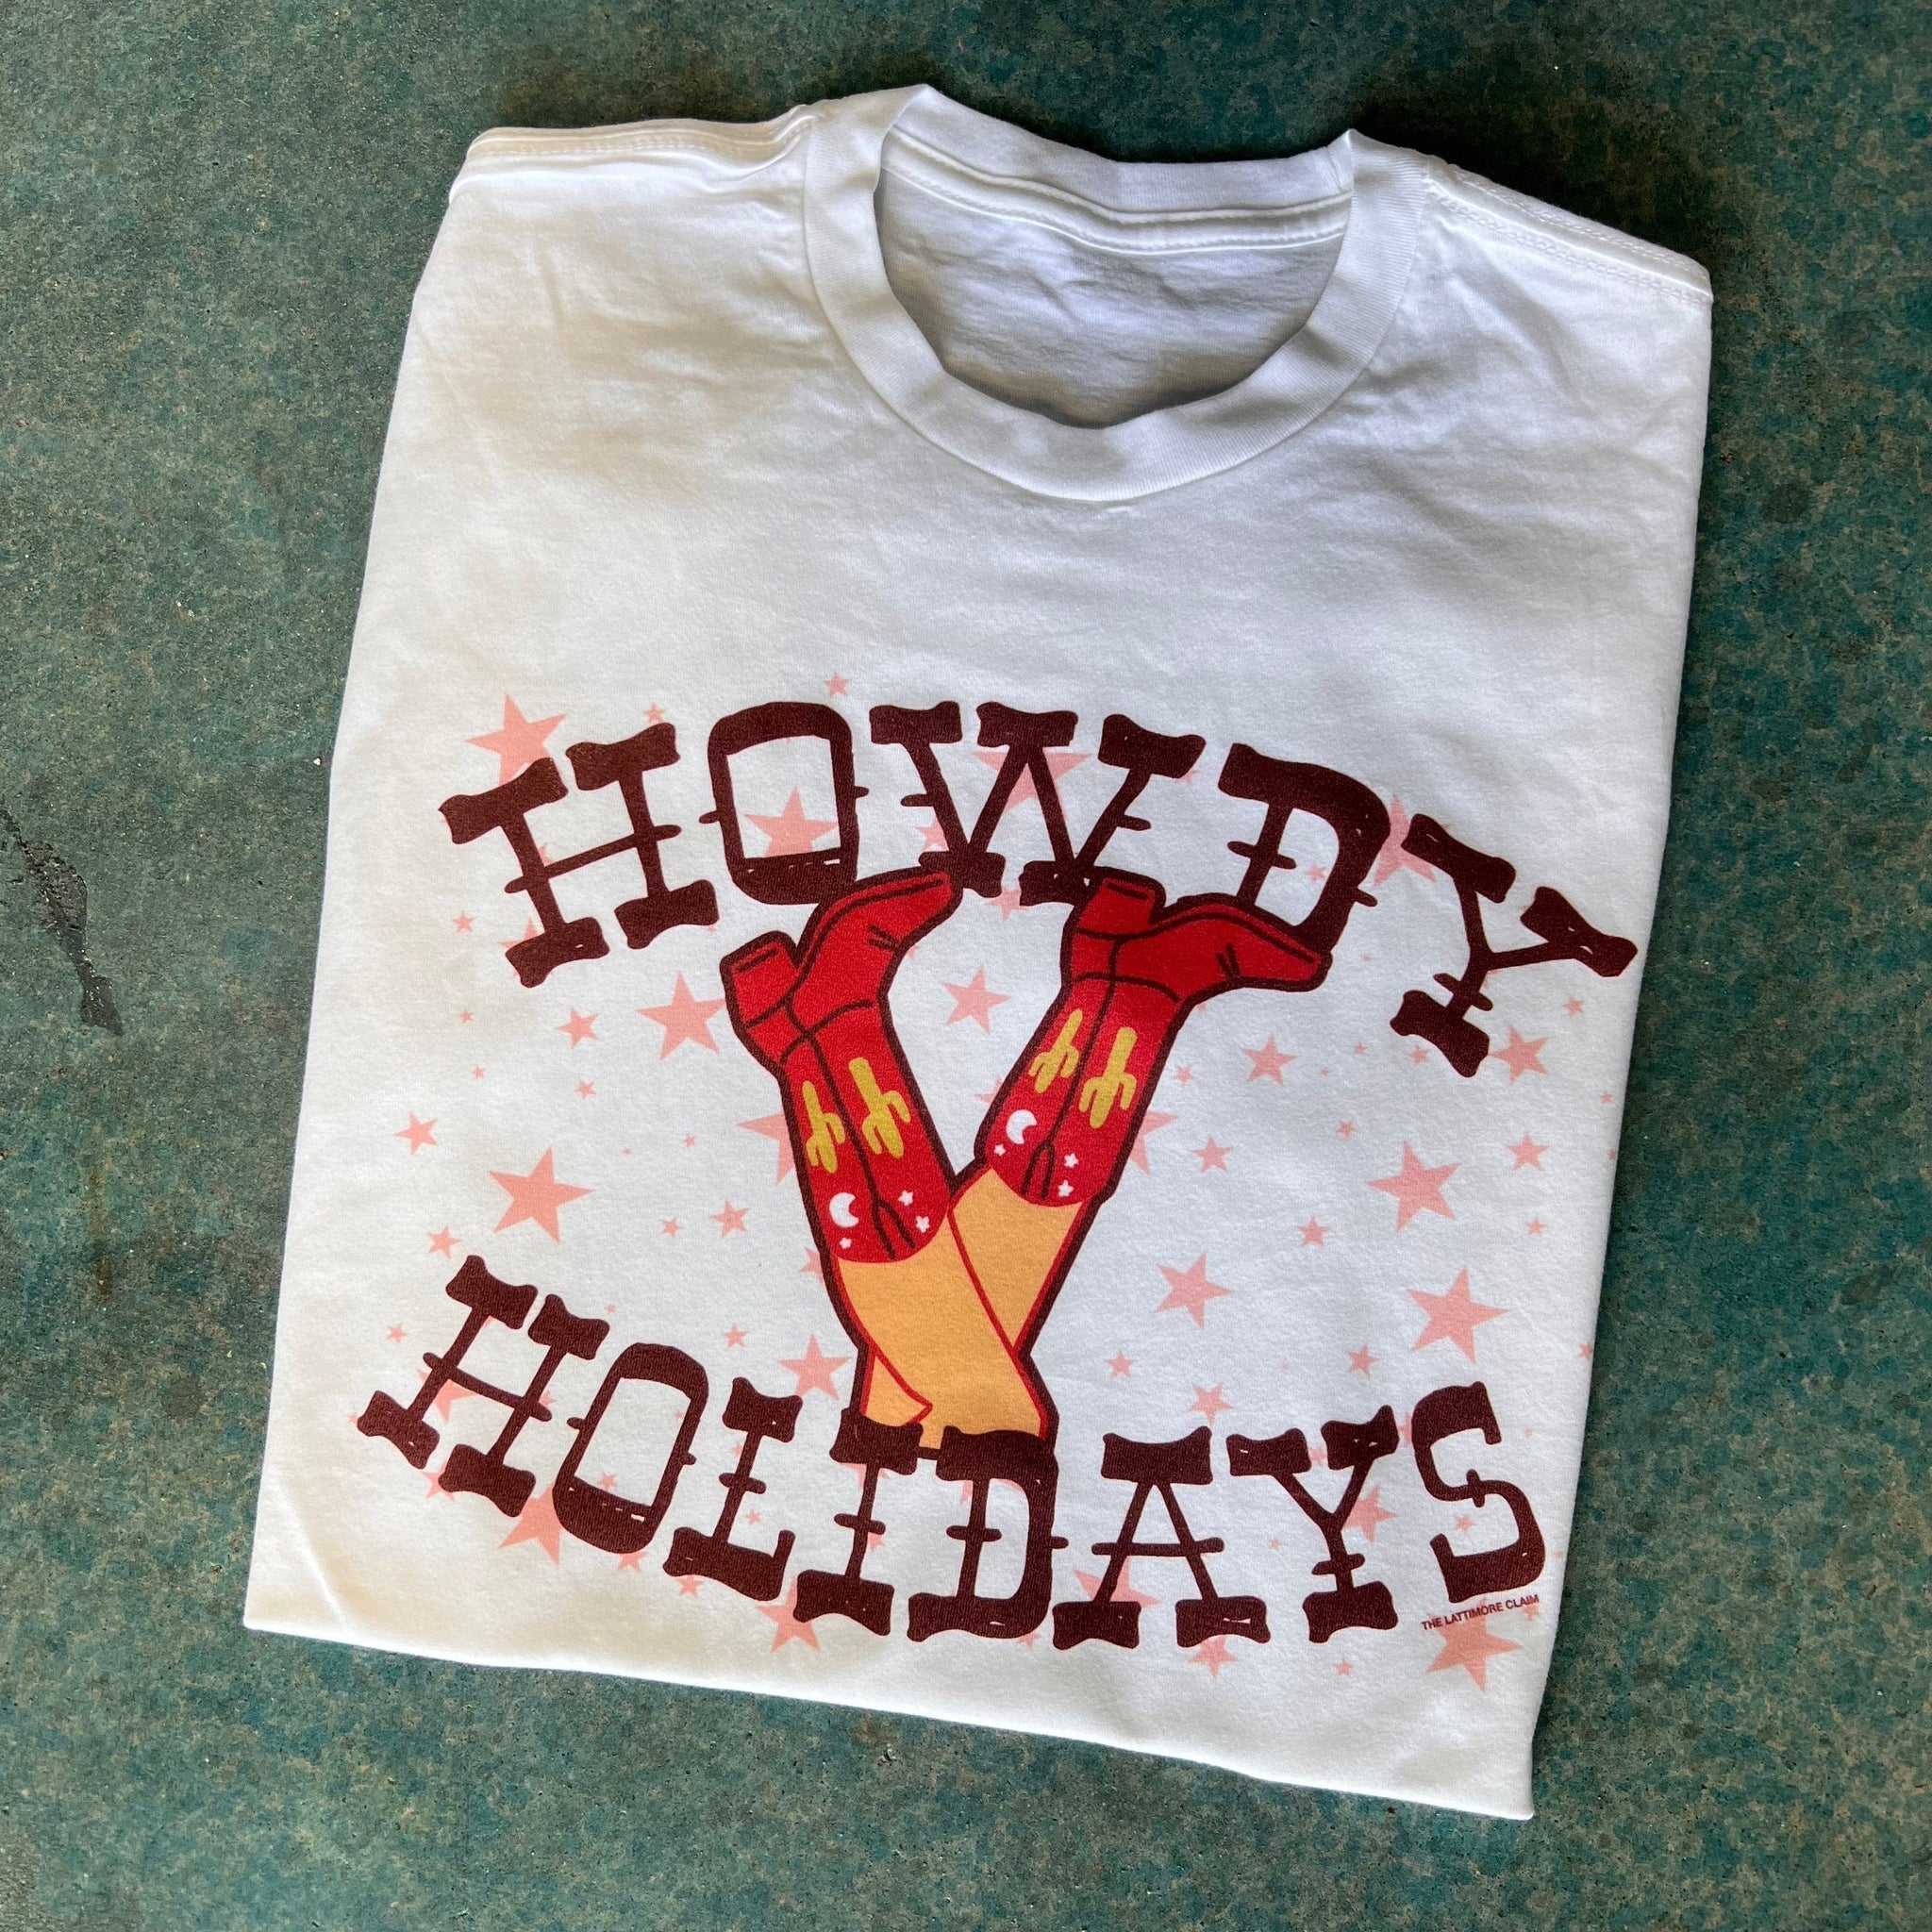 This white tee includes a crew neckline, short sleeves, and a hand drawn Christmas design of legs with red cowboy boots on. The cowboy boots have cactus and moon details on them, with pink stars all around the design, and the words "HOWDY HOLIDAYS" are above and below the design. The Western font is a fun touch to this graphic tee. This is shown as a folded flatlay on a blue background.